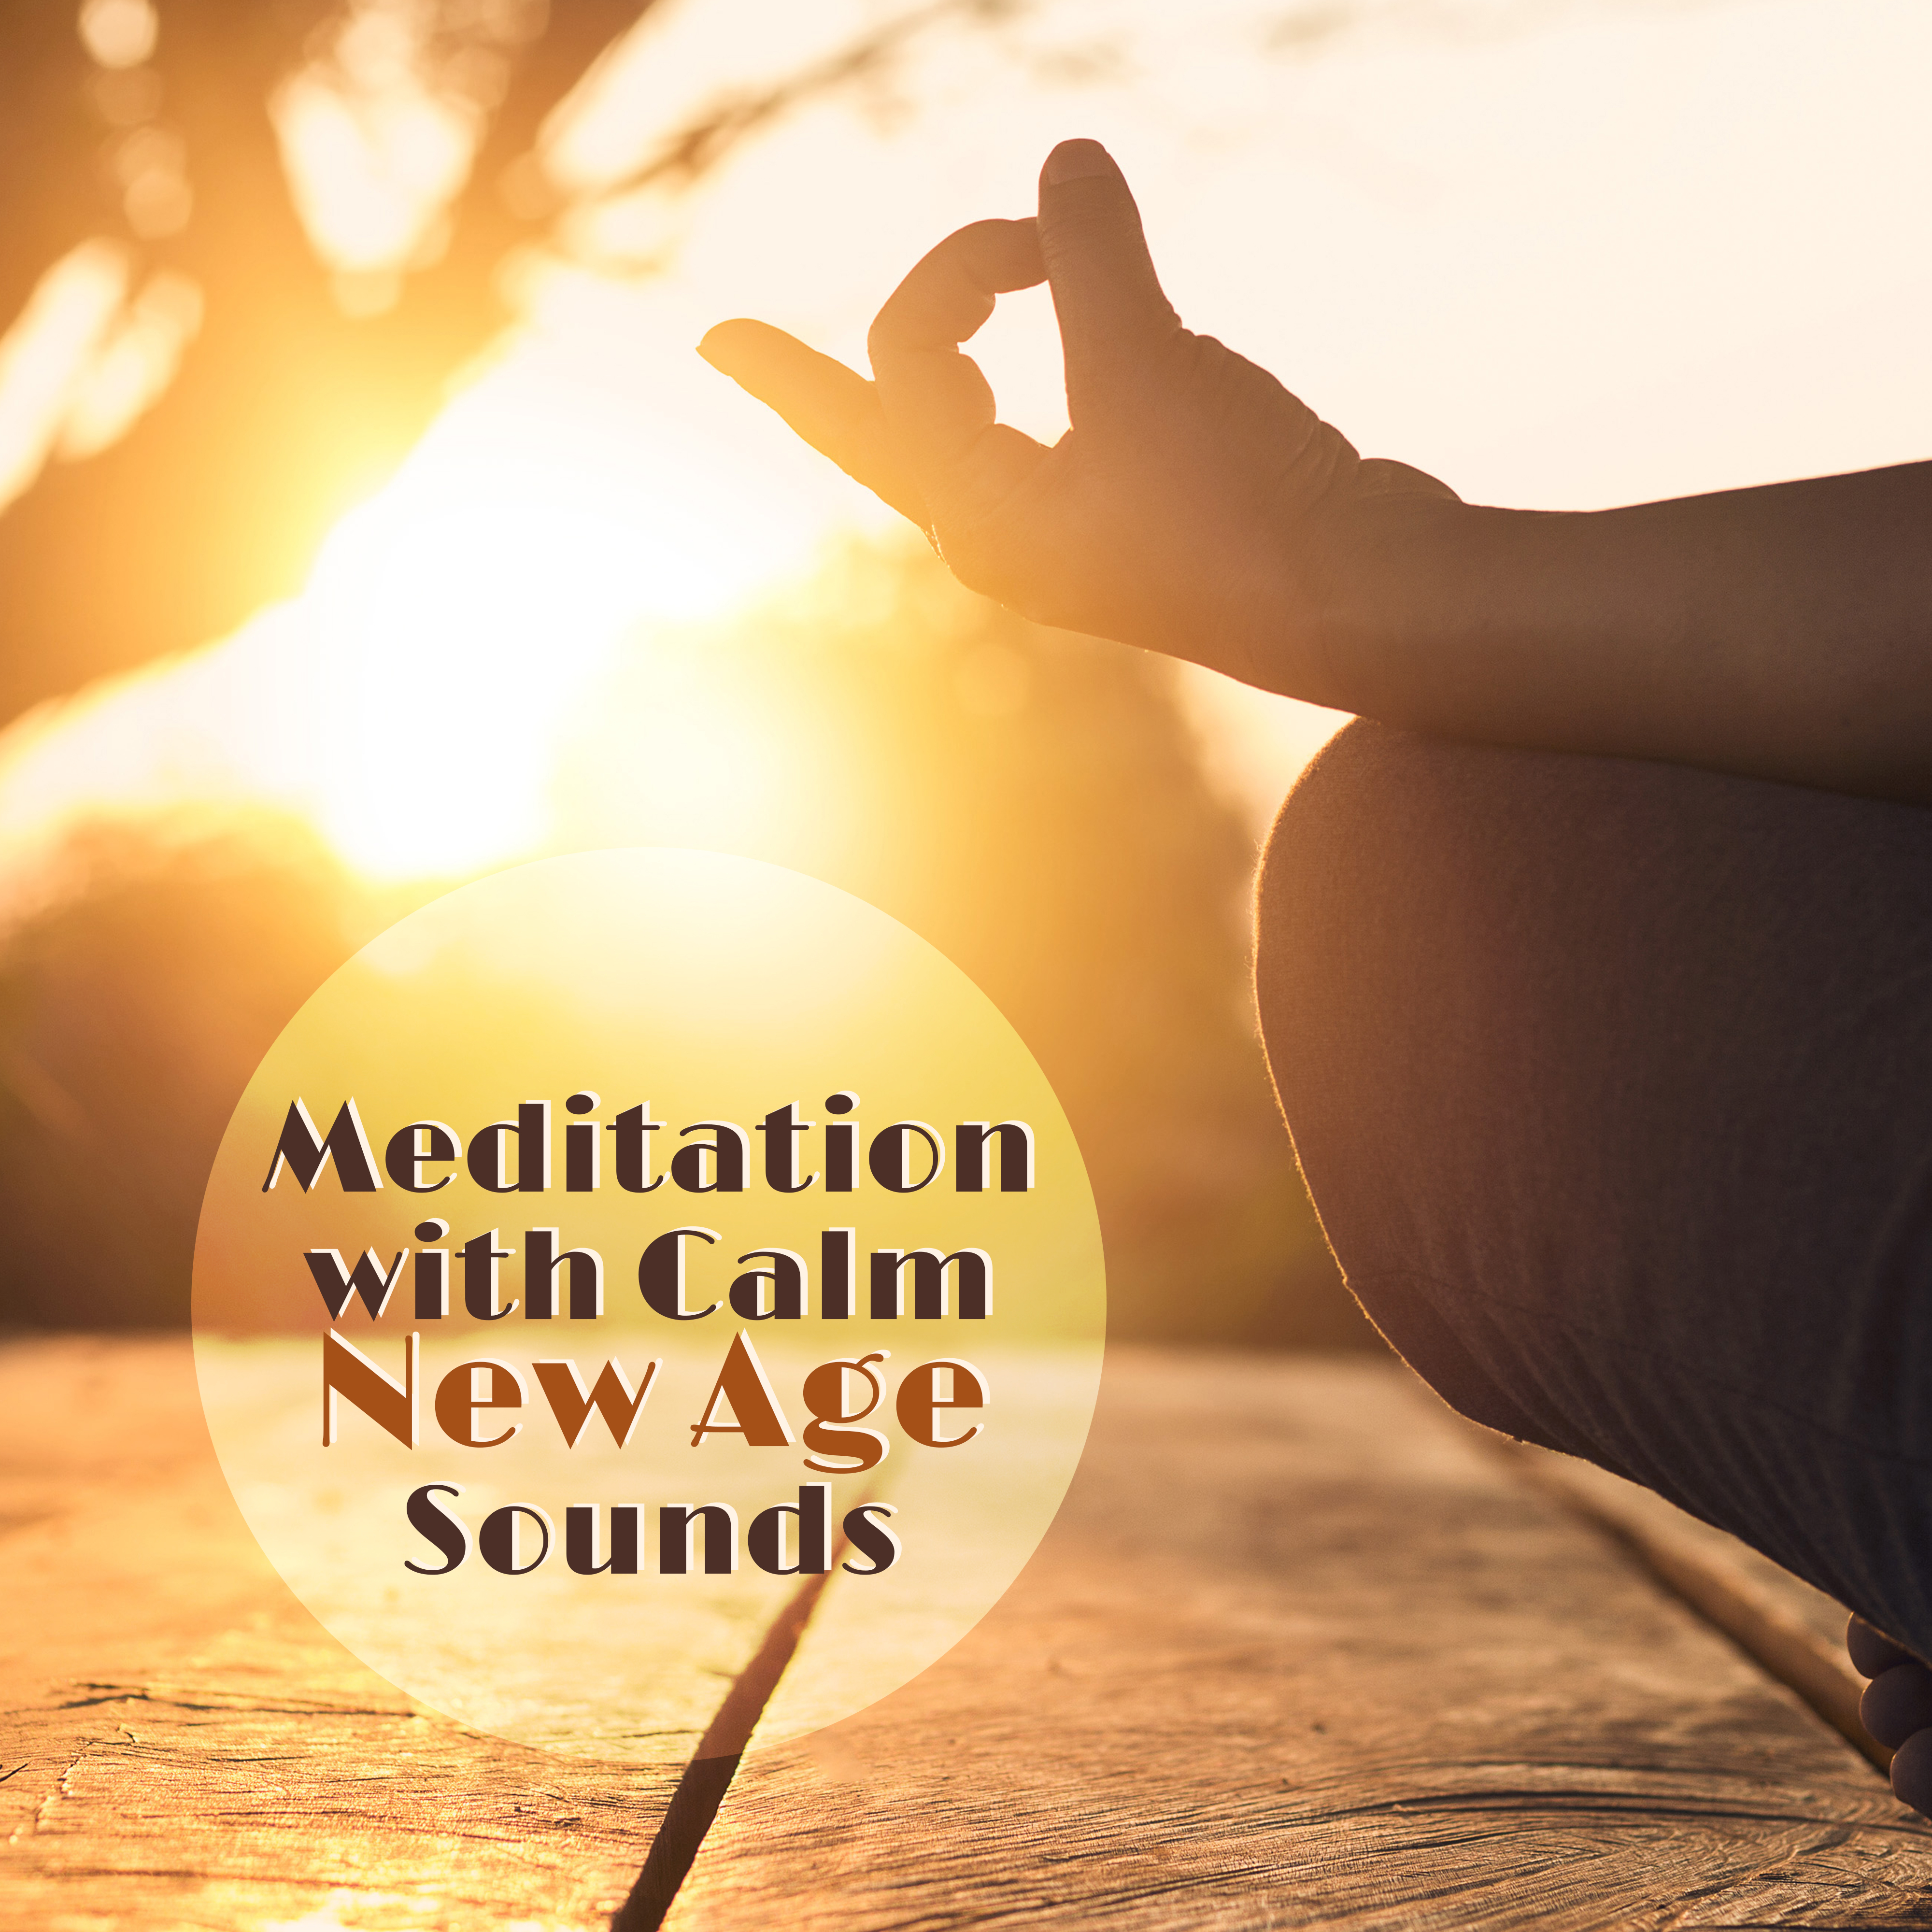 Meditation with Calm New Age Sounds